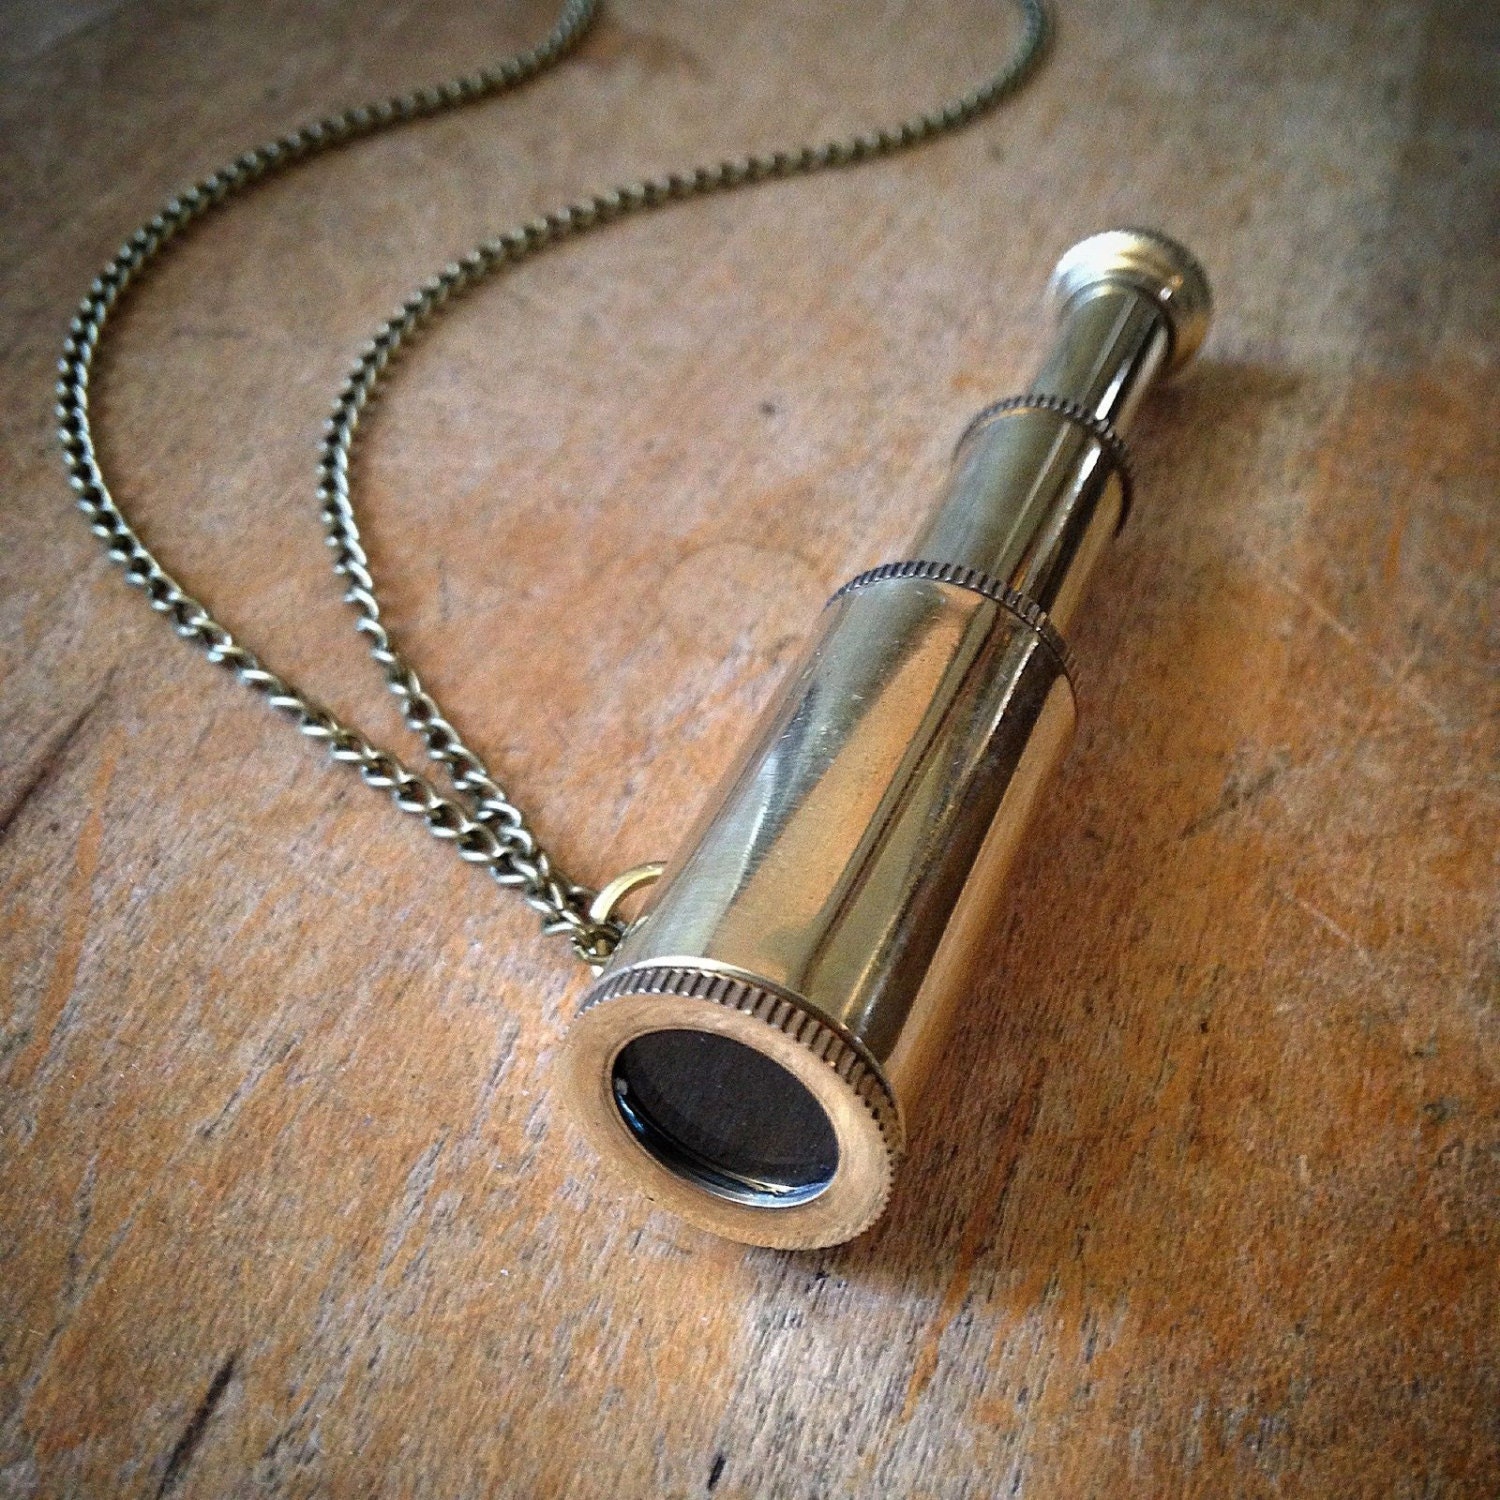 SALE: Vintage Style Pirate Telescope, Collapsible Spyglass Necklace, Shiny Gold Brass